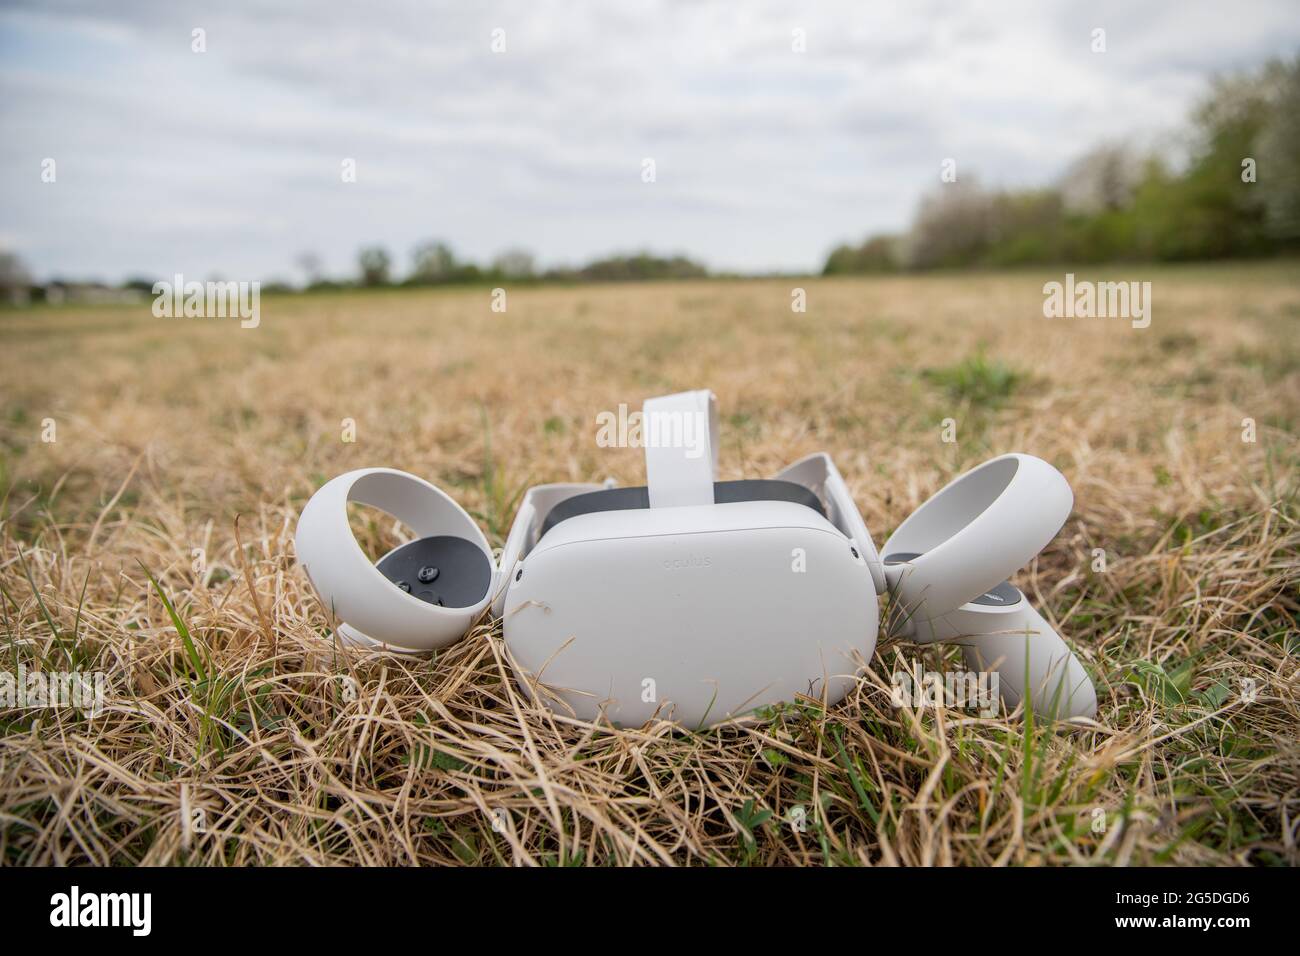 Oculus Quest 2 virtual reality headset with controllers, resting on a lawn Stock Photo